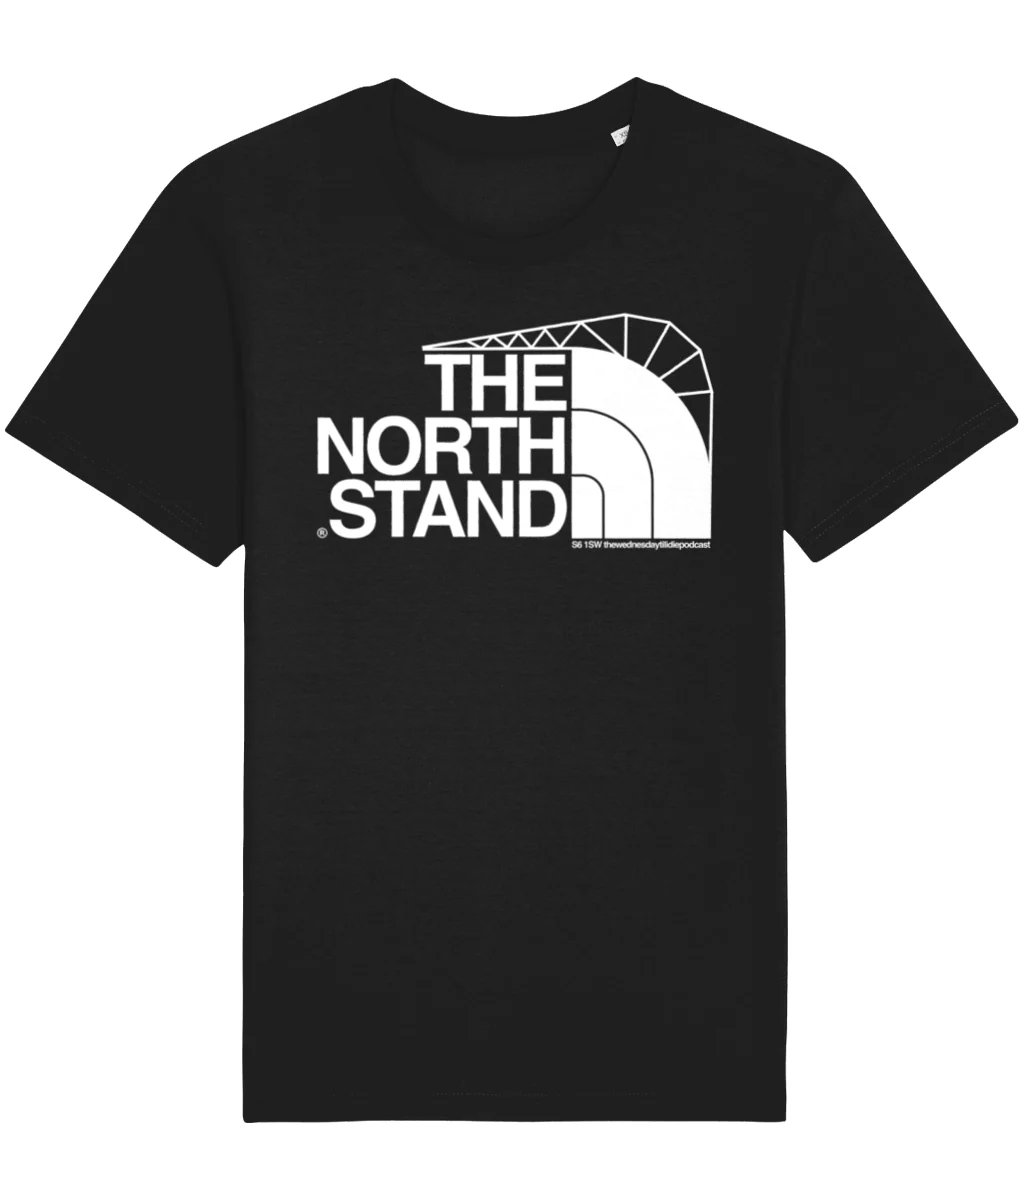 ⭐️ G I V E A W A Y ⭐️

IF #SWFC beat Norwich City today then we'll give away one of our North Stand t-shirts to one lucky winner. 

1️⃣ Follow @WTIDPOD. 
2️⃣ Like and retweet. 
3️⃣ Tag a friend. 

🛍️ wtidpod.myshopify.com/products/north…
🎟️ Use code FREEDELIVERY. 

#SWFC • #WAWAW